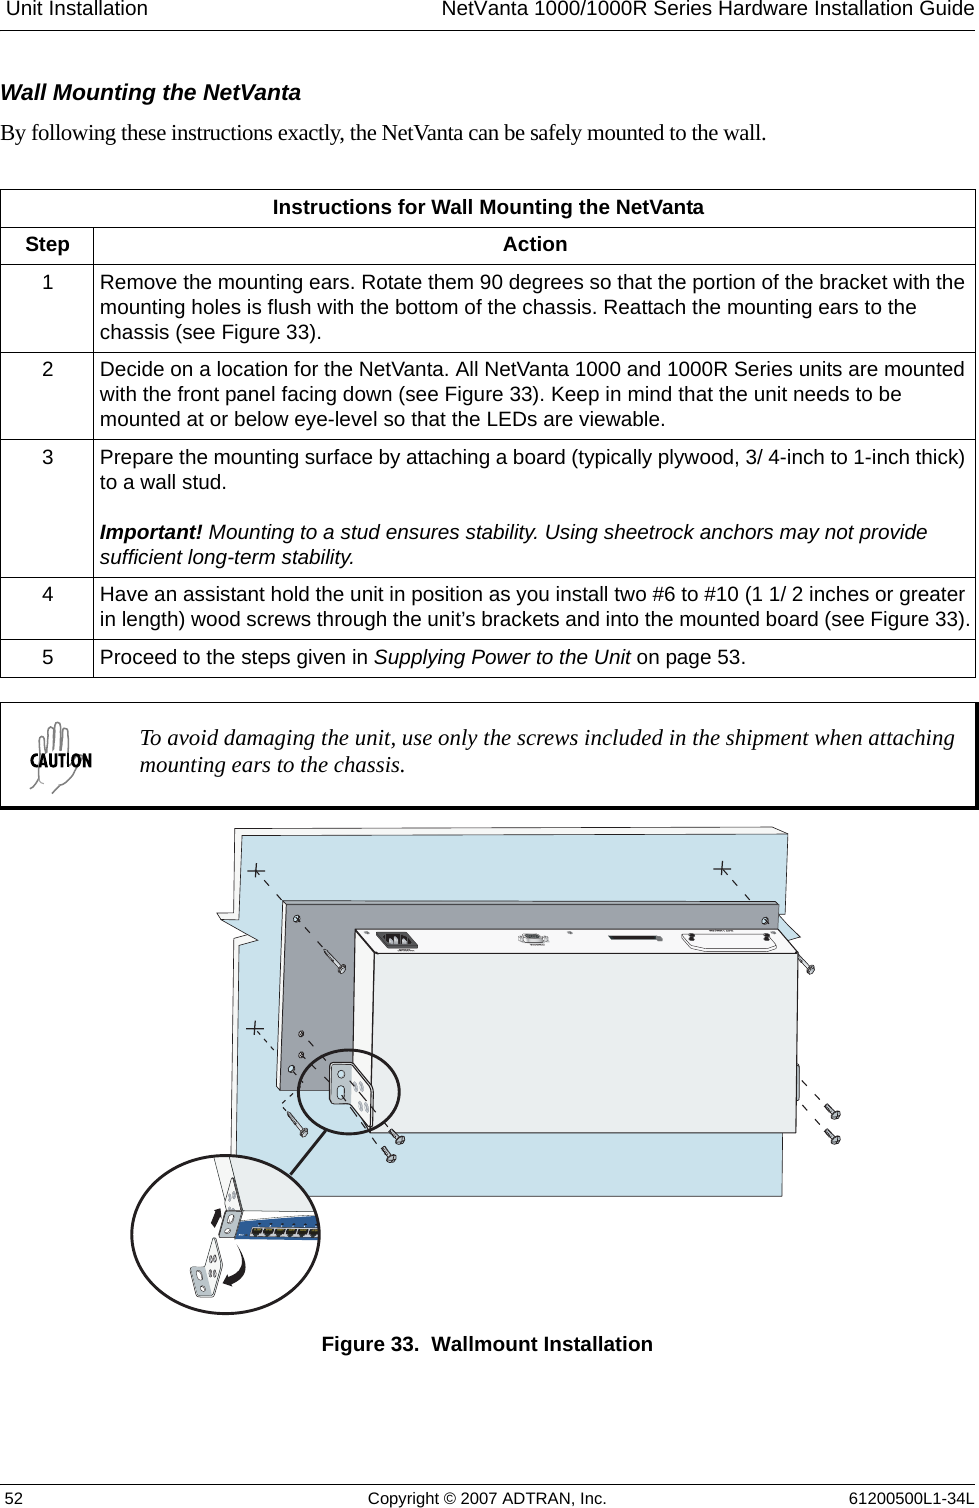  Unit Installation NetVanta 1000/1000R Series Hardware Installation Guide 52 Copyright © 2007 ADTRAN, Inc. 61200500L1-34LWall Mounting the NetVantaBy following these instructions exactly, the NetVanta can be safely mounted to the wall.Figure 33.  Wallmount InstallationInstructions for Wall Mounting the NetVantaStep Action1 Remove the mounting ears. Rotate them 90 degrees so that the portion of the bracket with the mounting holes is flush with the bottom of the chassis. Reattach the mounting ears to the chassis (see Figure 33). 2 Decide on a location for the NetVanta. All NetVanta 1000 and 1000R Series units are mounted with the front panel facing down (see Figure 33). Keep in mind that the unit needs to be mounted at or below eye-level so that the LEDs are viewable.3 Prepare the mounting surface by attaching a board (typically plywood, 3/ 4-inch to 1-inch thick) to a wall stud.Important! Mounting to a stud ensures stability. Using sheetrock anchors may not provide sufficient long-term stability. 4 Have an assistant hold the unit in position as you install two #6 to #10 (1 1/ 2 inches or greater in length) wood screws through the unit’s brackets and into the mounted board (see Figure 33).5 Proceed to the steps given in Supplying Power to the Unit on page 53.To avoid damaging the unit, use only the screws included in the shipment when attaching mounting ears to the chassis.SLOT 1 NIM/VIMCONSOLE100-250 VAC 50-60Hz